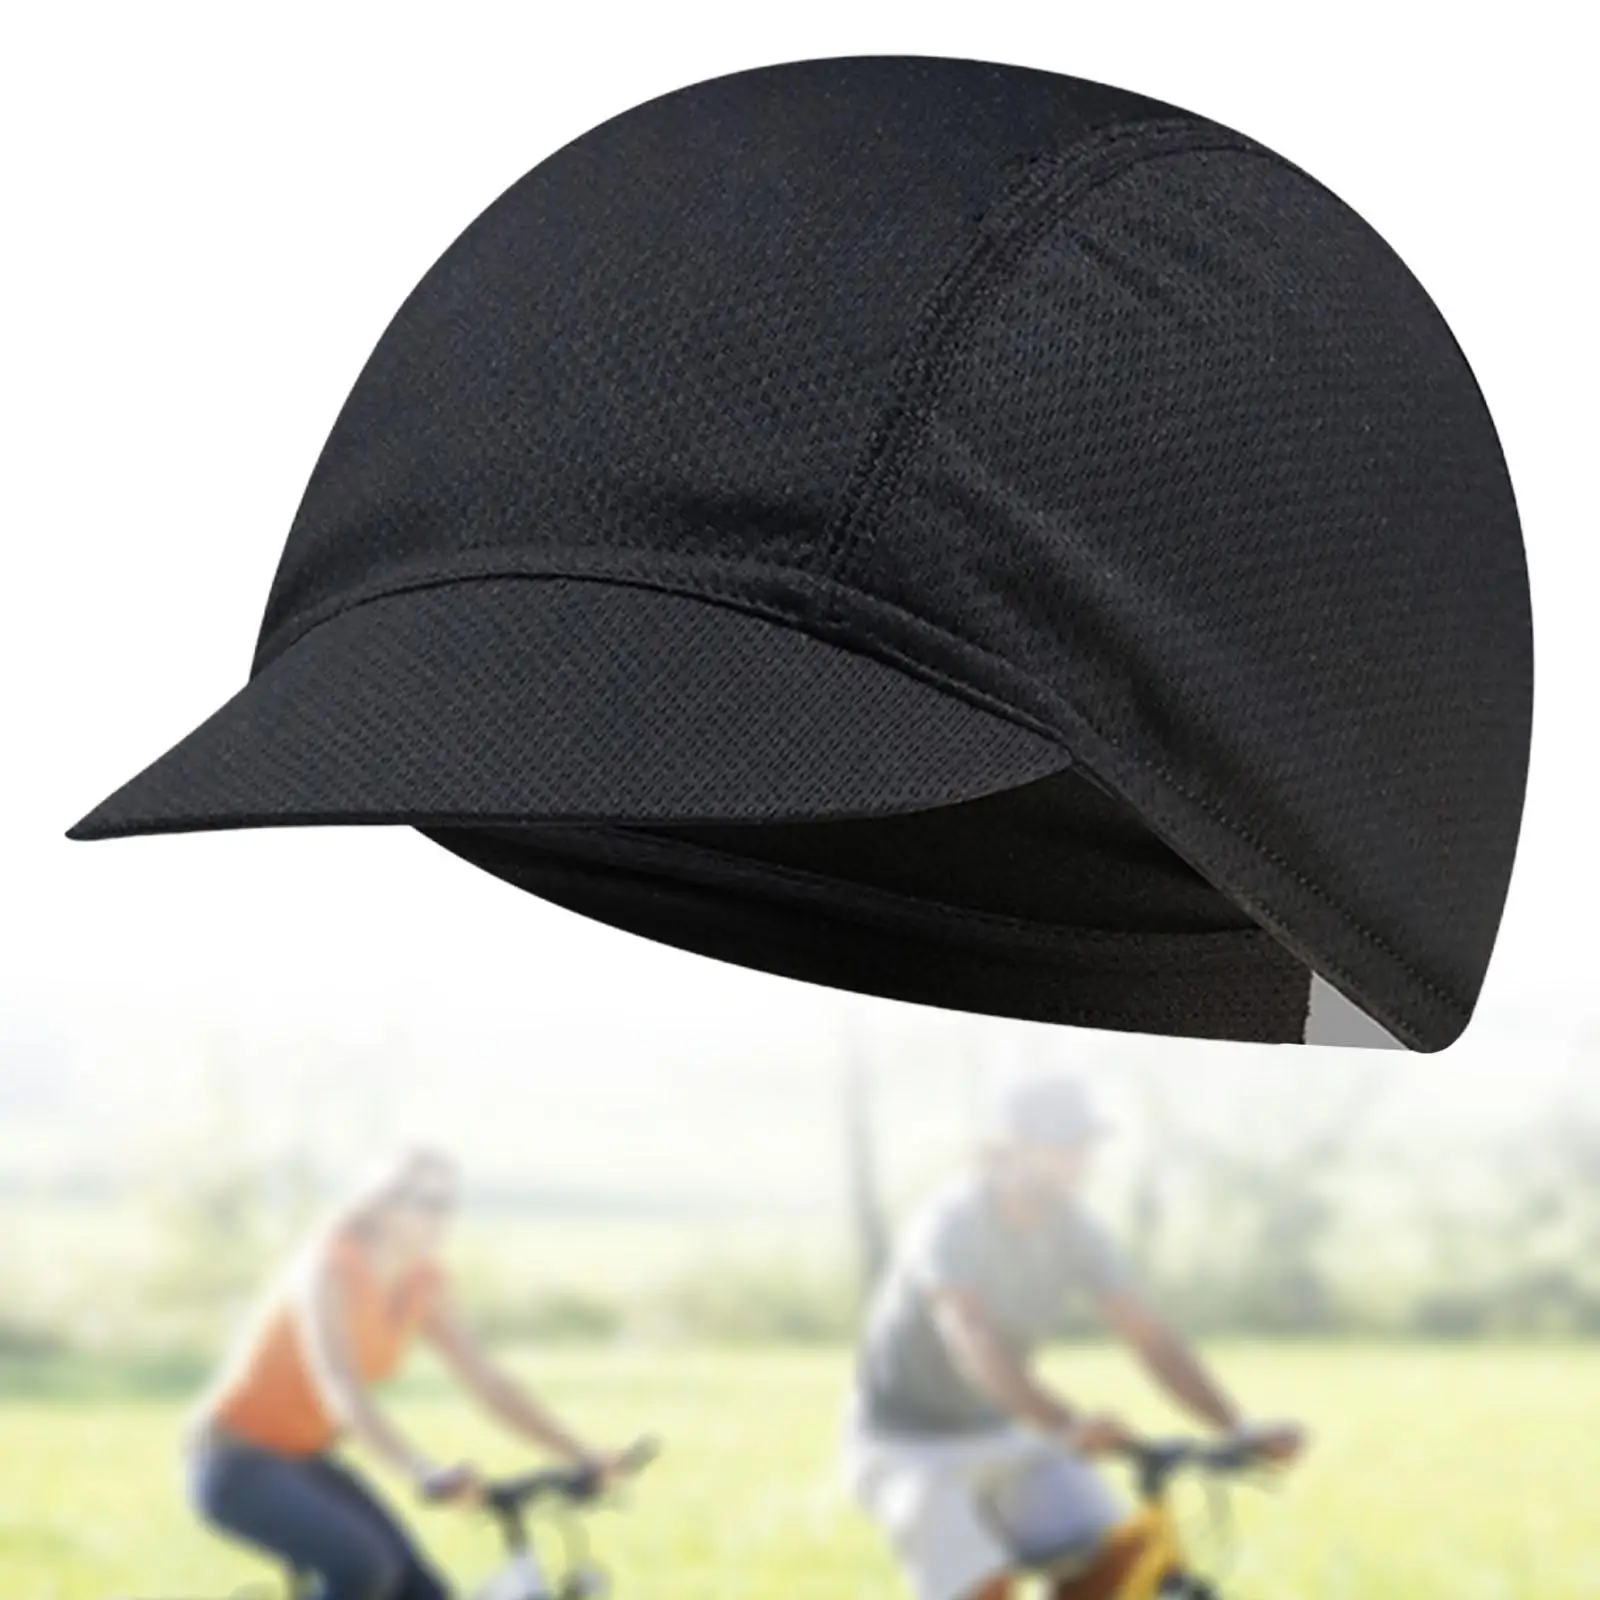    Breathable Sunproof  Elastic  for Riding Motorcycle Biking Outdoor Fishing